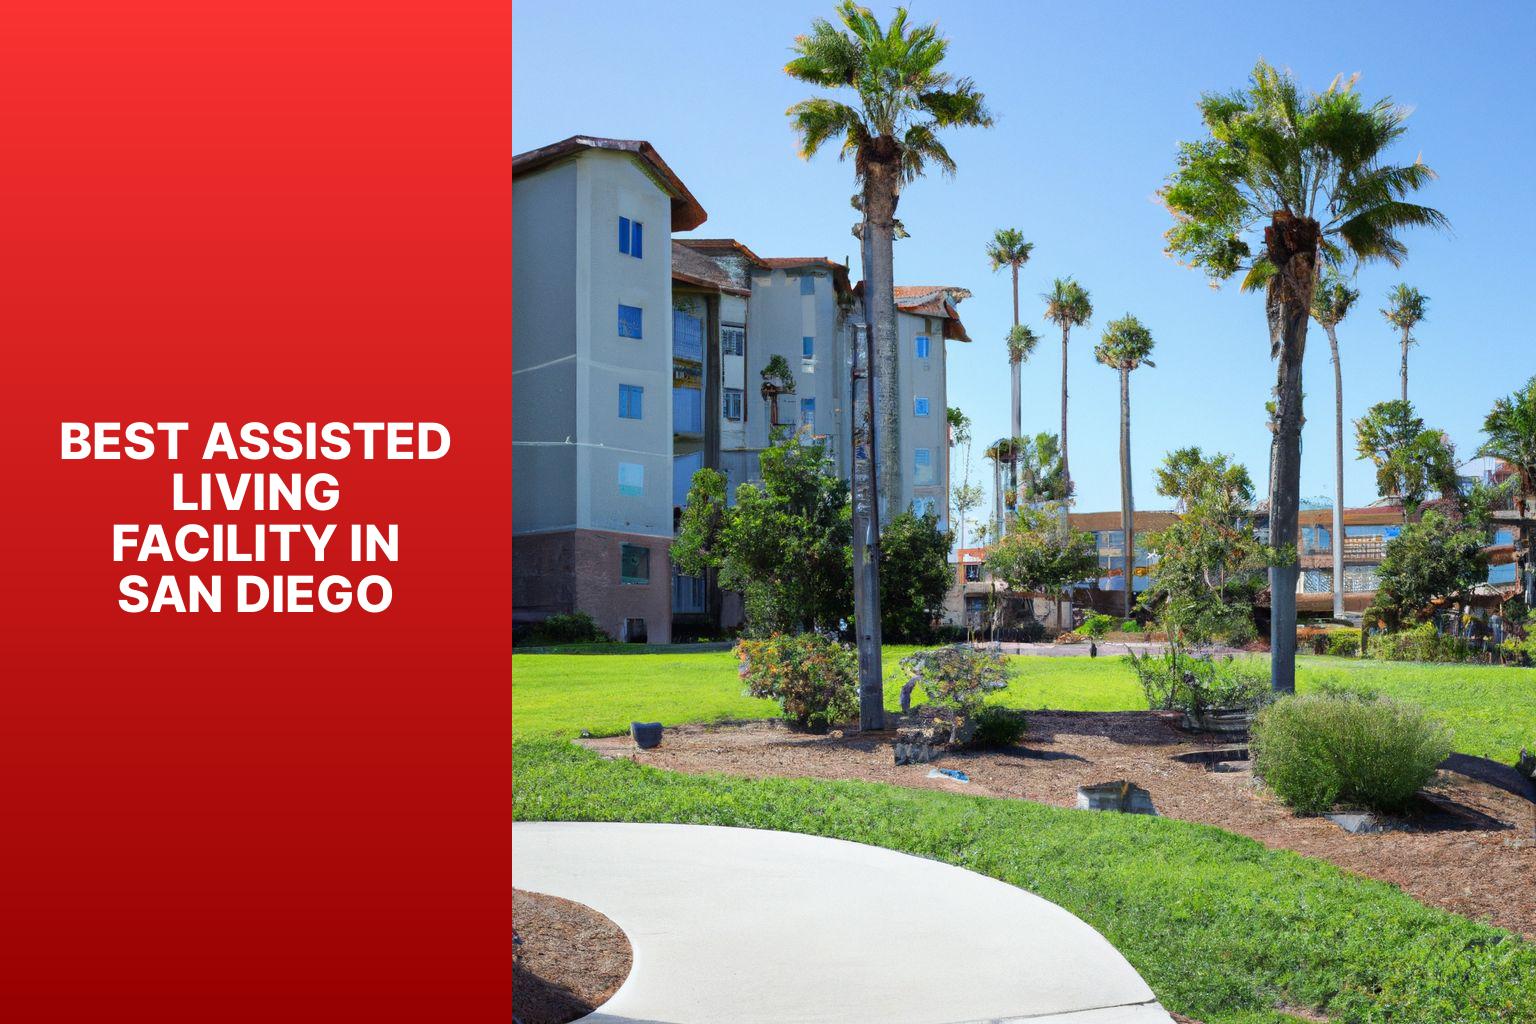 Best Assisted Living Facility in San Diego